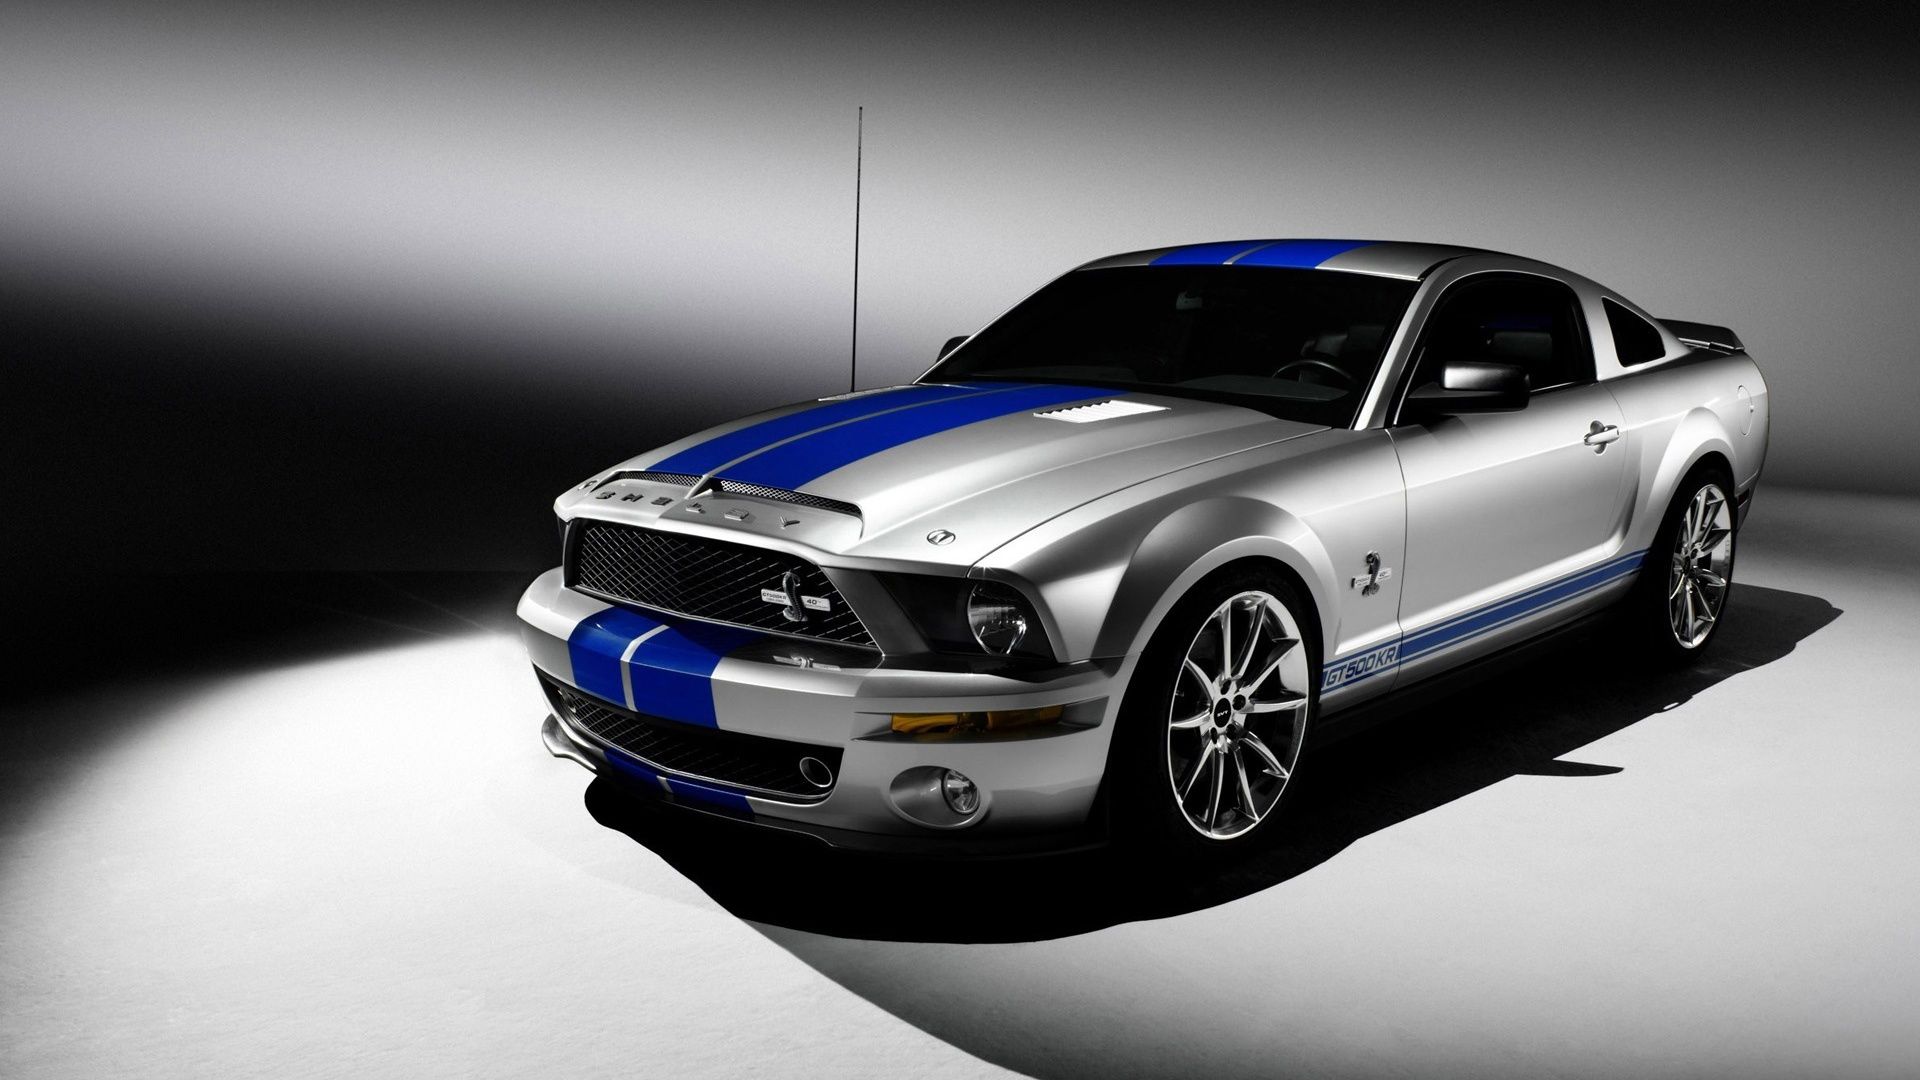 Ford Mustang Shelby Gt500 Silver 1920x1080 Wallpaper Teahub Io